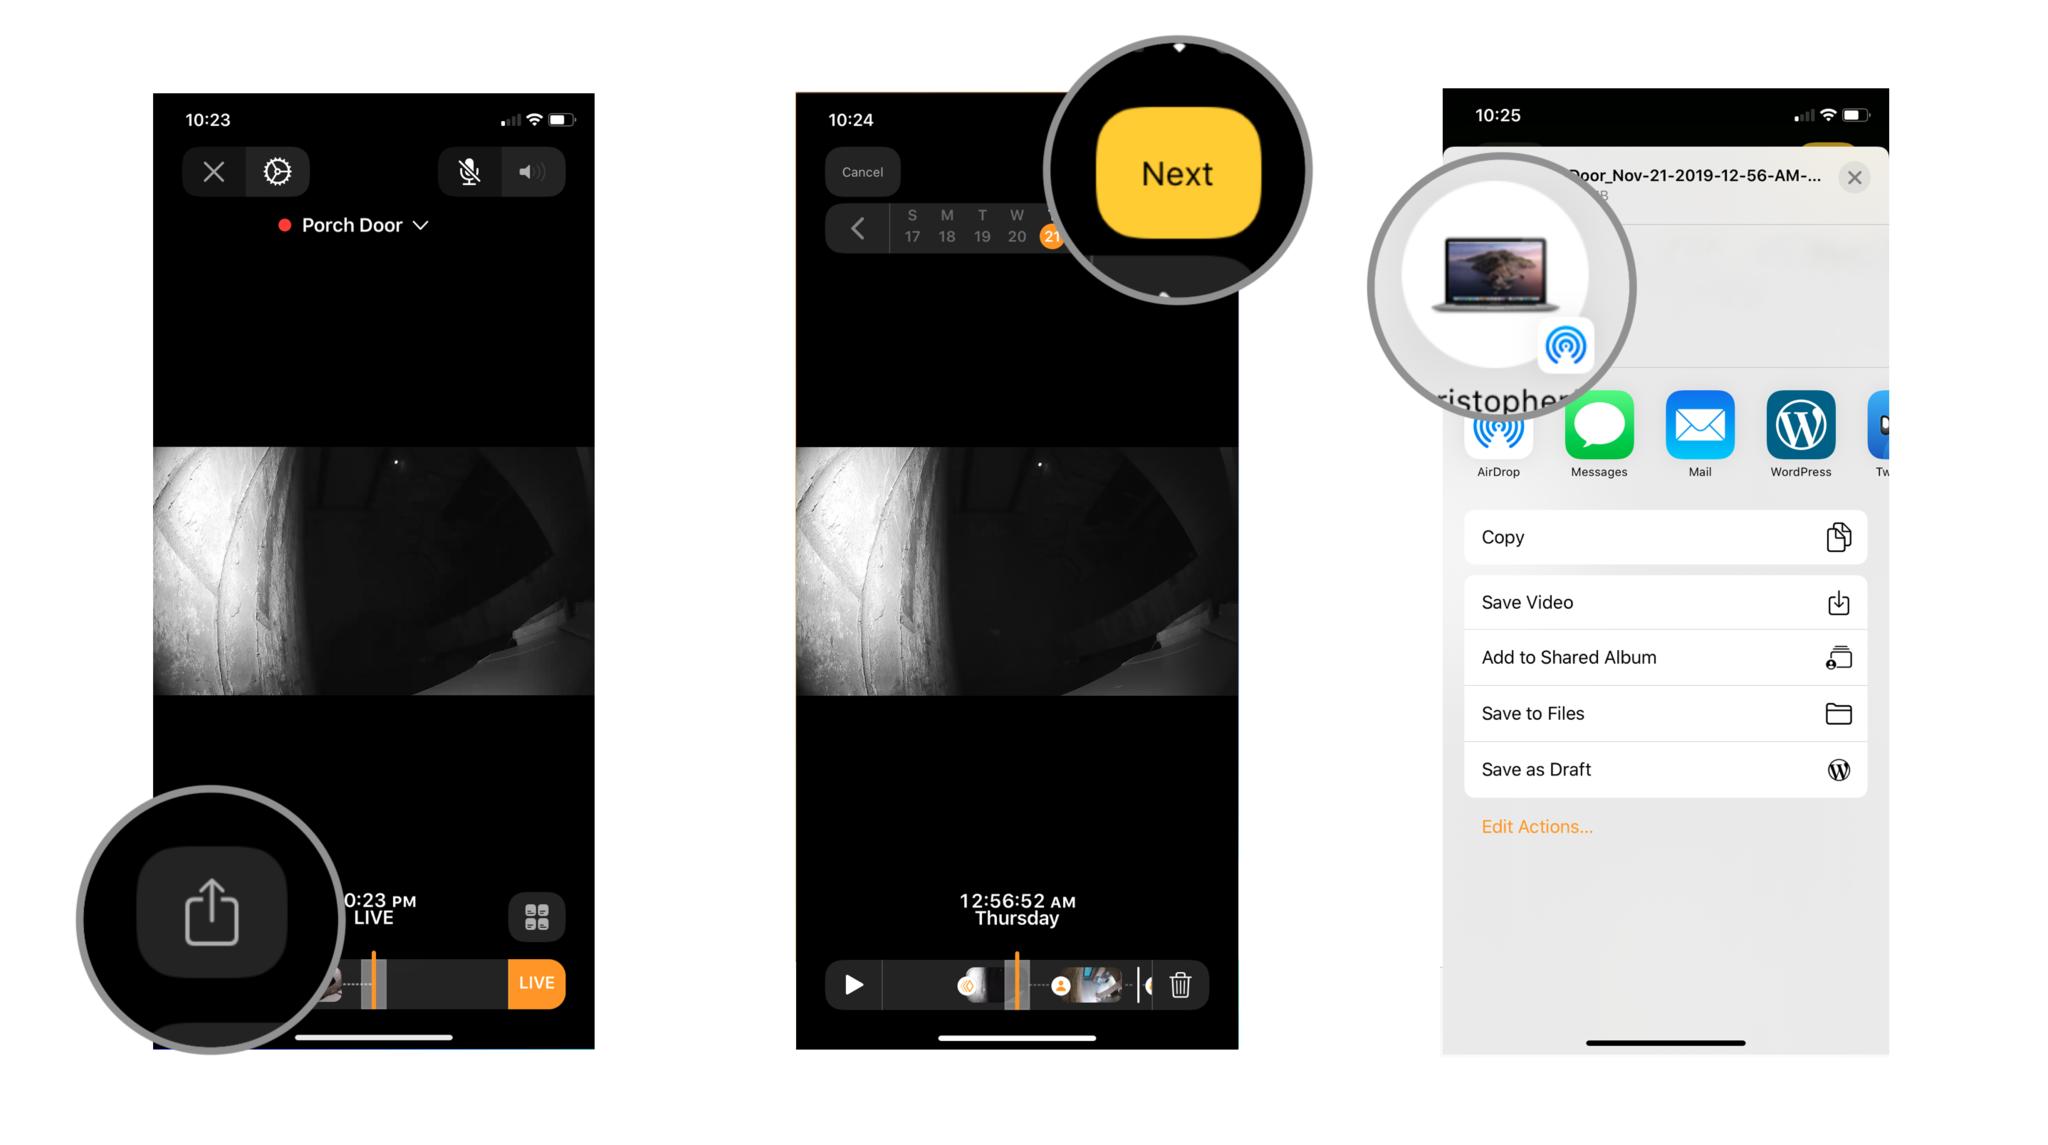 Steps 7-9 depicting how to share video recordings in the Home app